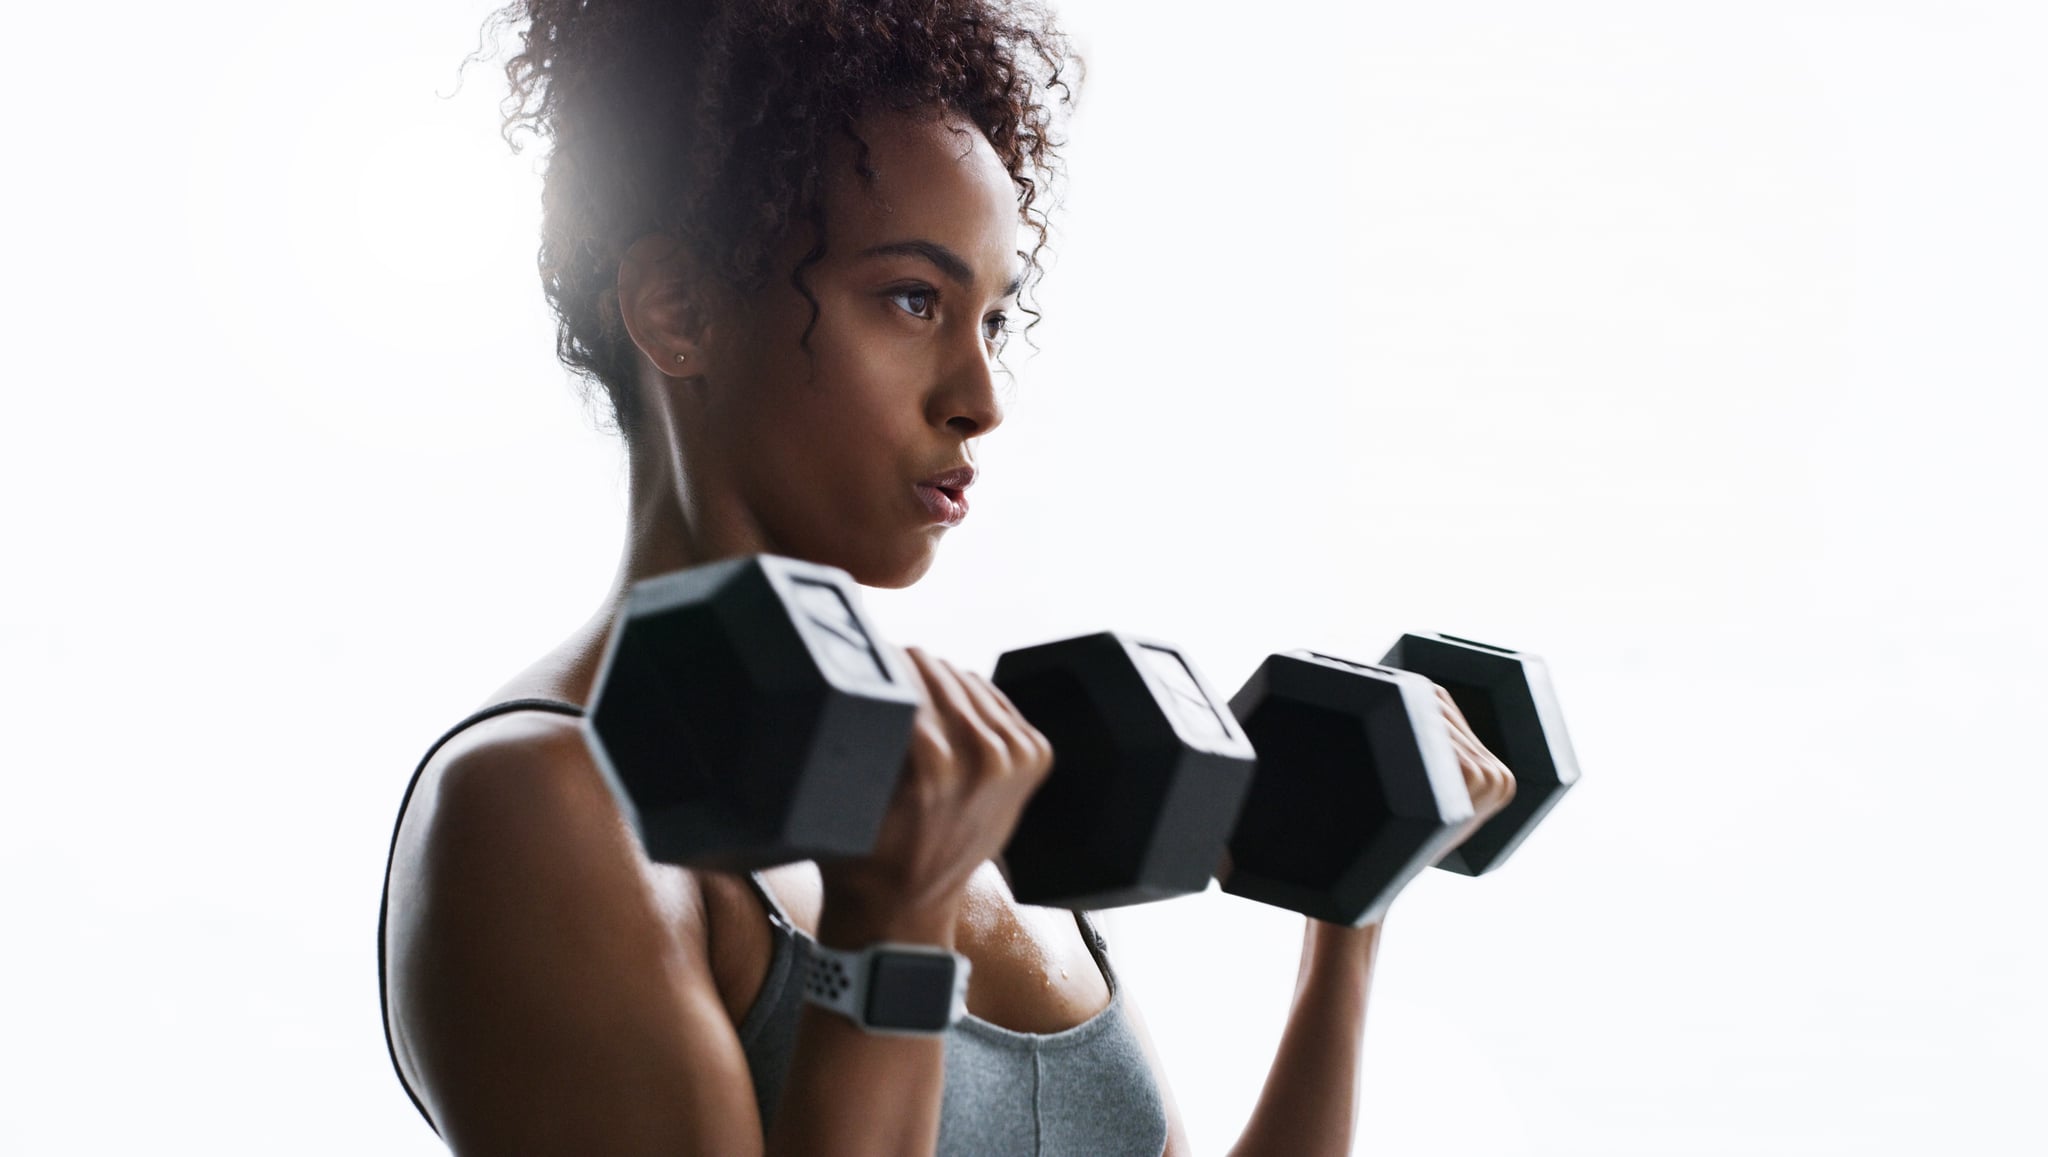 <p>If you don't want to spend hours at the gym doing cardio and strength training, try this <a href="https://www.popsugar.com/fitness/20-Minute-CrossFit-Workout-45174645" class="ga-track">20-minute CrossFit HIIT workout</a>, which features a combo of both.</p> <p><strong>Equipment needed:</strong> A set of medium-weight dumbbells (six to 20 pounds), a stationary bike or fan bike, and a rower.</p>